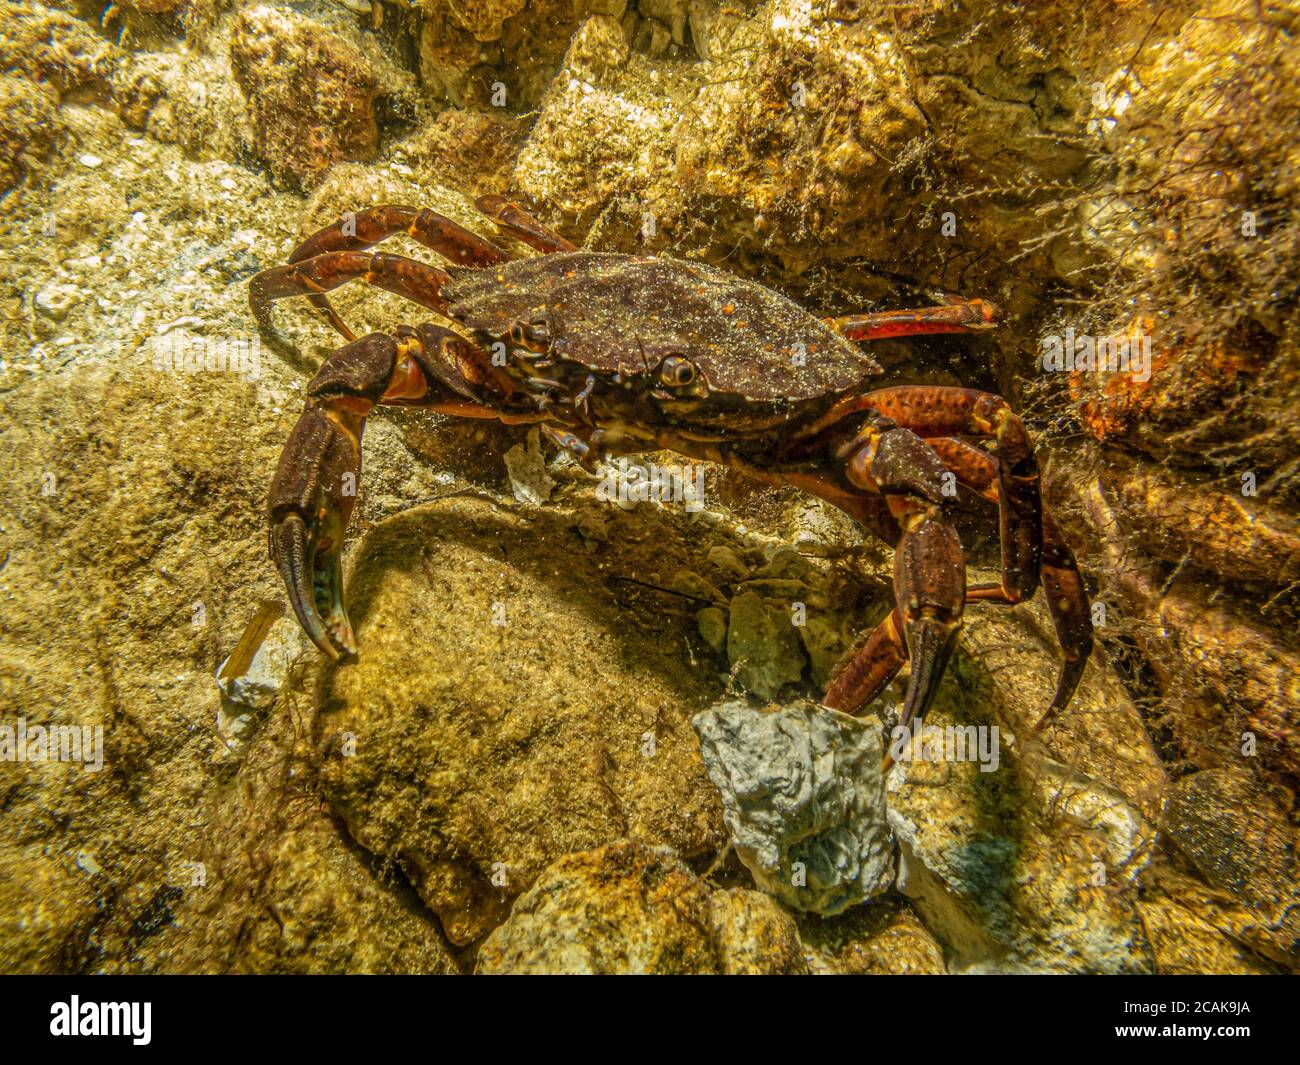 A closeup underwater picture of a crab taking shelter among stones and seaweed. Picture from Oresund, Malmo in southern Sweden. Stock Photo